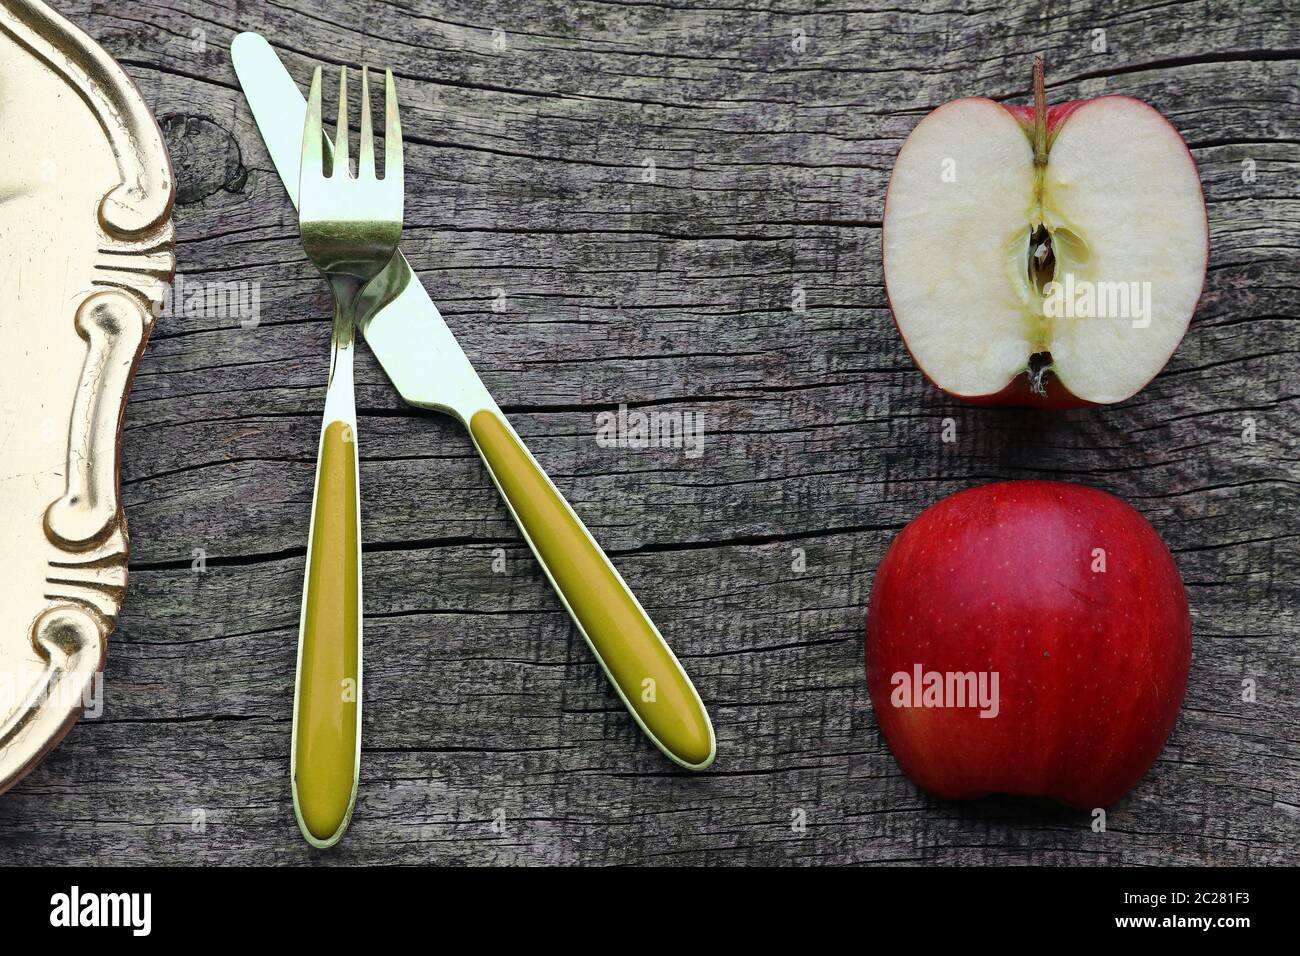 Two half apples, cutlery and plate on an old wooden table Stock Photo